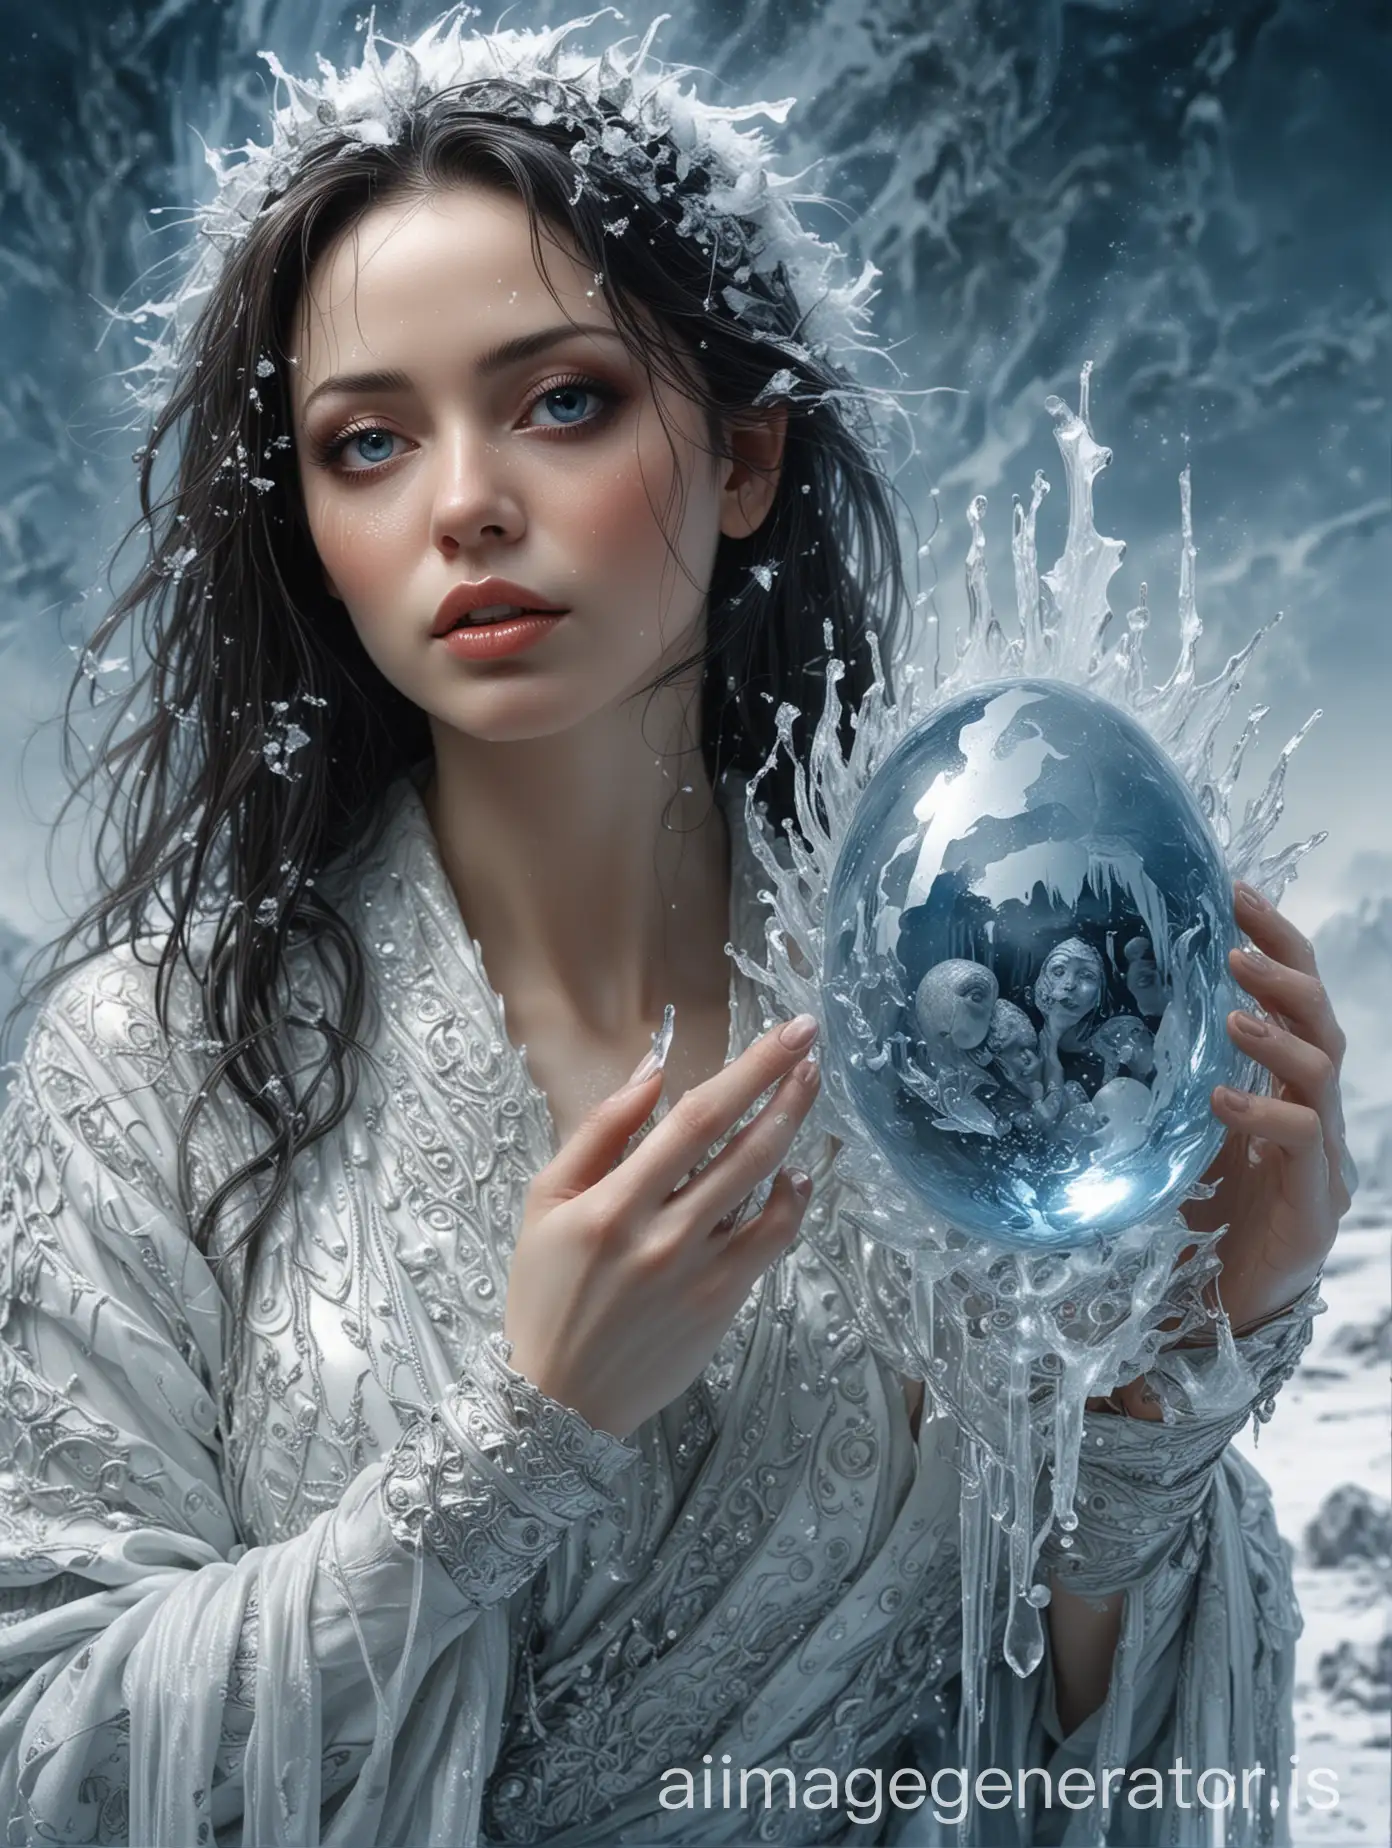 fullbodyview, Hajime Sorayama, luis royo art style, Benoit B. Mandelbrot art style, filigree, Michelle Gomez glass-face covered in frostbite, looking at the egg, she is holding in her arm an dragonegg made of lava and fire,  woman's face is glacial shiny face smooth as glass, glass transparent, eyes glowing blue,  glass glossy clothes, woman with a hair made of icicles, glass clear icicles are growing at her feet and climbing her leg, her face and skin is covered in frost, behind her a white winterscape